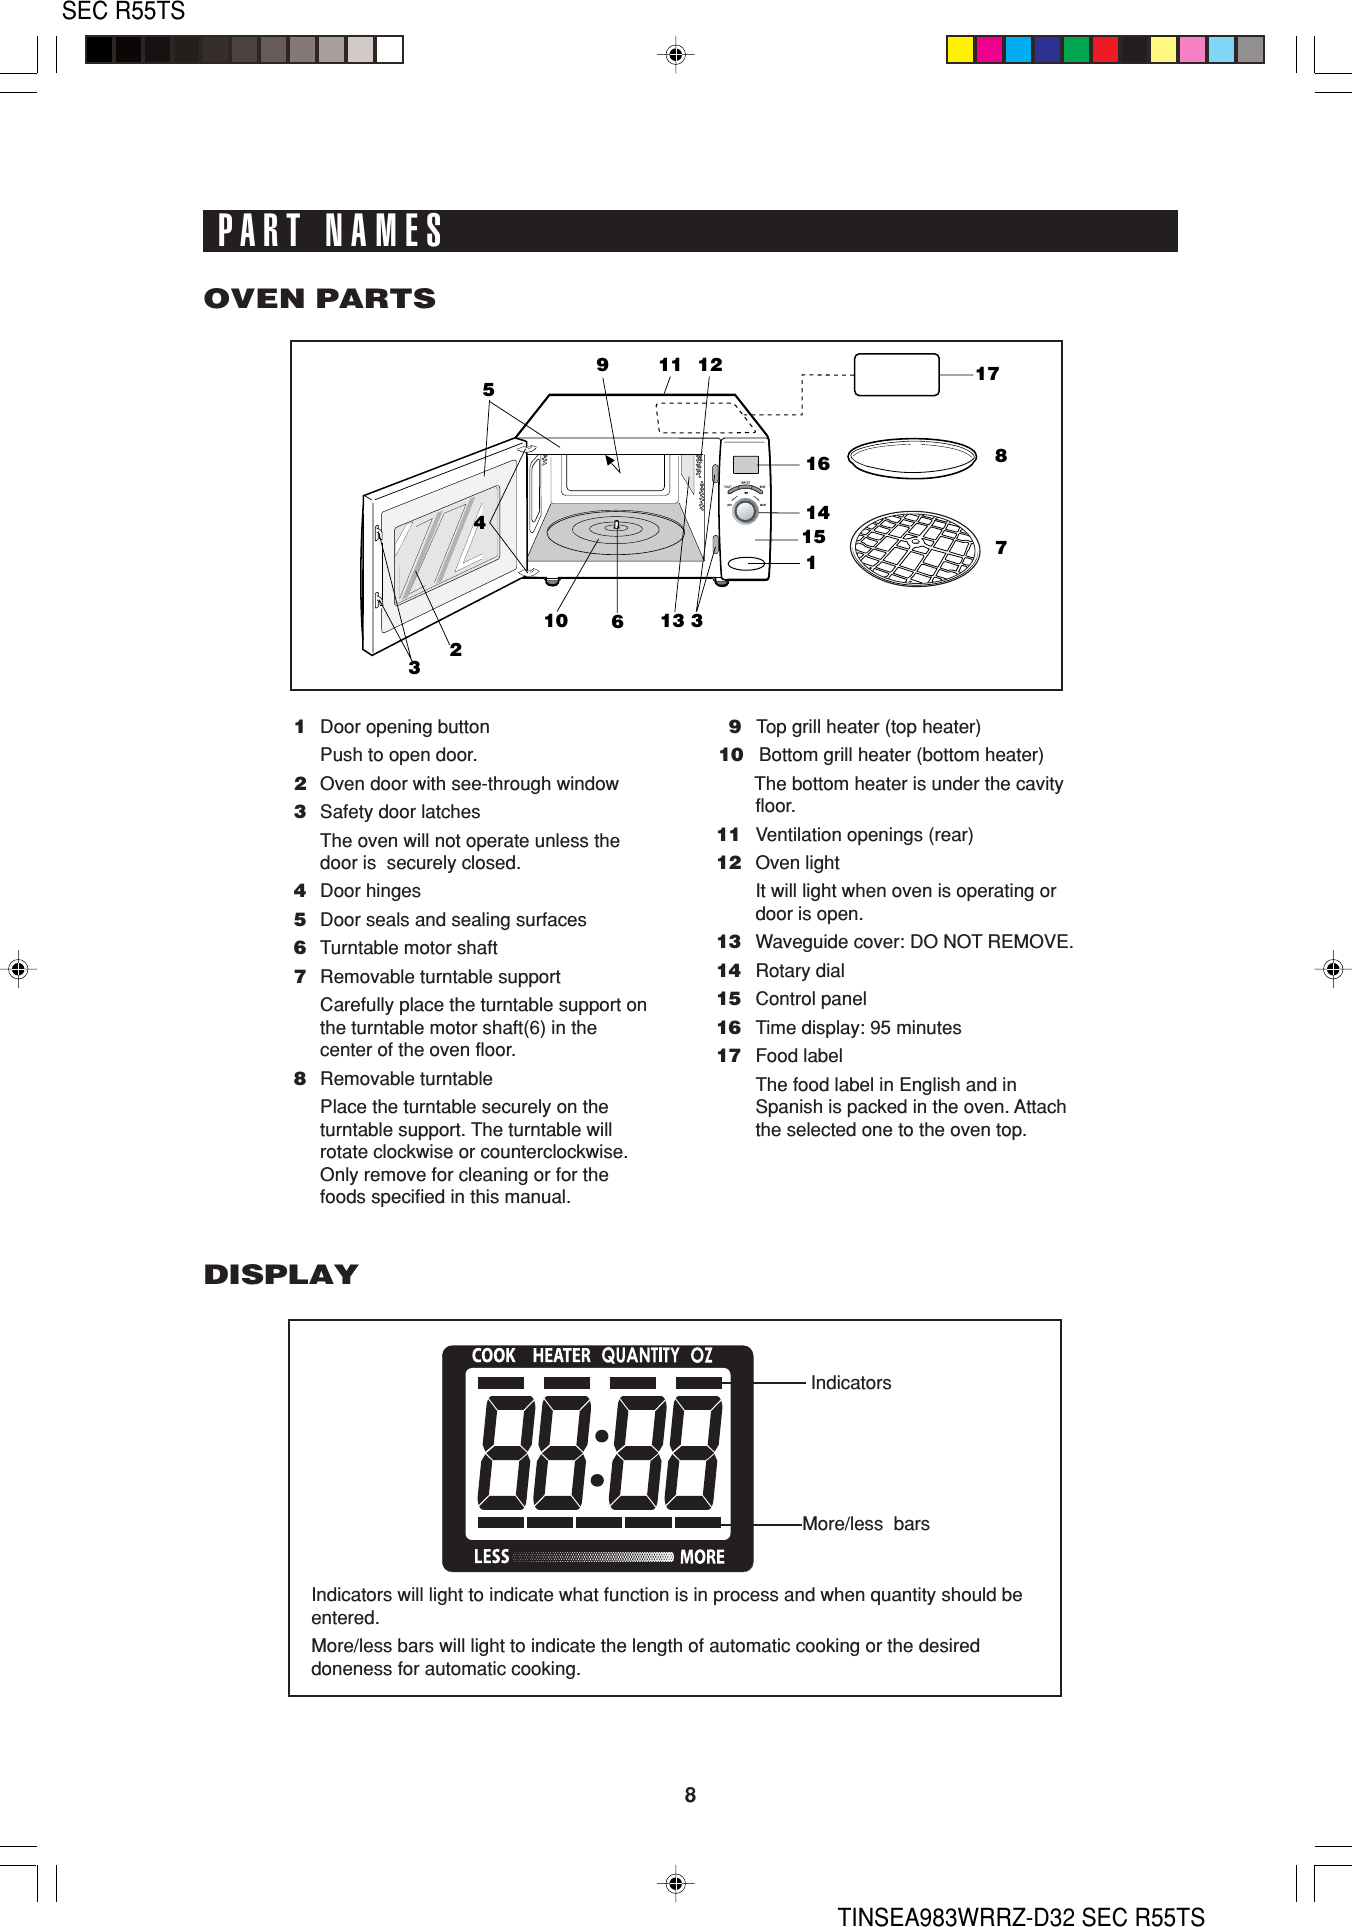 8SEC R55TSTINSEA983WRRZ-D32 SEC R55TSPART NAMES1Door opening buttonPush to open door.2Oven door with see-through window3Safety door latchesThe oven will not operate unless thedoor is  securely closed.4Door hinges5Door seals and sealing surfaces6Turntable motor shaft7Removable turntable supportCarefully place the turntable support onthe turntable motor shaft(6) in thecenter of the oven floor.8Removable turntablePlace the turntable securely on theturntable support. The turntable willrotate clockwise or counterclockwise.Only remove for cleaning or for thefoods specified in this manual.   9   Top grill heater (top heater) 10   Bottom grill heater (bottom heater)        The bottom heater is under the cavityfloor.11 Ventilation openings (rear)12 Oven lightIt will light when oven is operating ordoor is open.13 Waveguide cover: DO NOT REMOVE.14 Rotary dial15 Control panel16 Time display: 95 minutes17 Food labelThe food label in English and inSpanish is packed in the oven. Attachthe selected one to the oven top.OVEN PARTSDISPLAYIndicators will light to indicate what function is in process and when quantity should beentered.More/less bars will light to indicate the length of automatic cooking or the desireddoneness for automatic cooking.87121614113910354326111517IndicatorsMore/less  bars